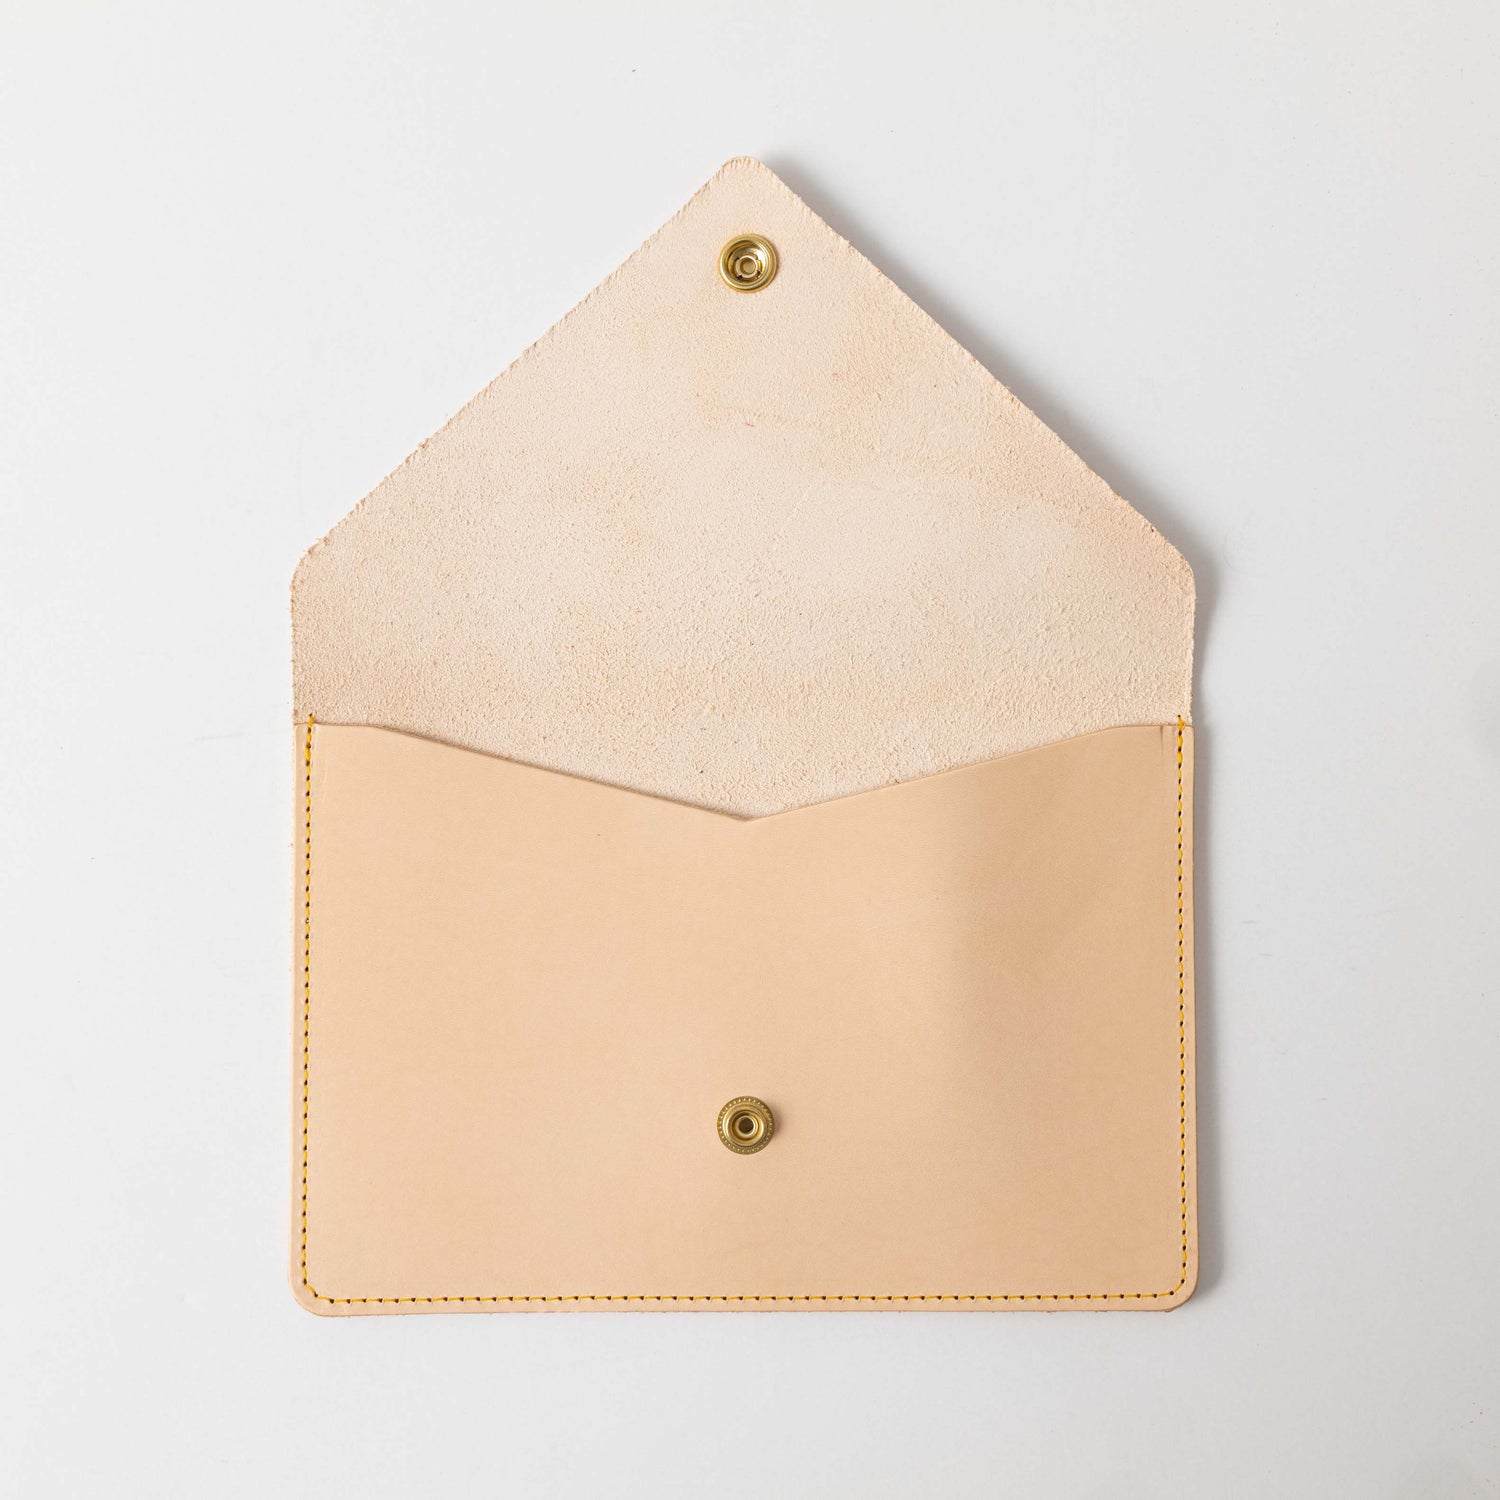 Vegetable Tanned Leather Clutch